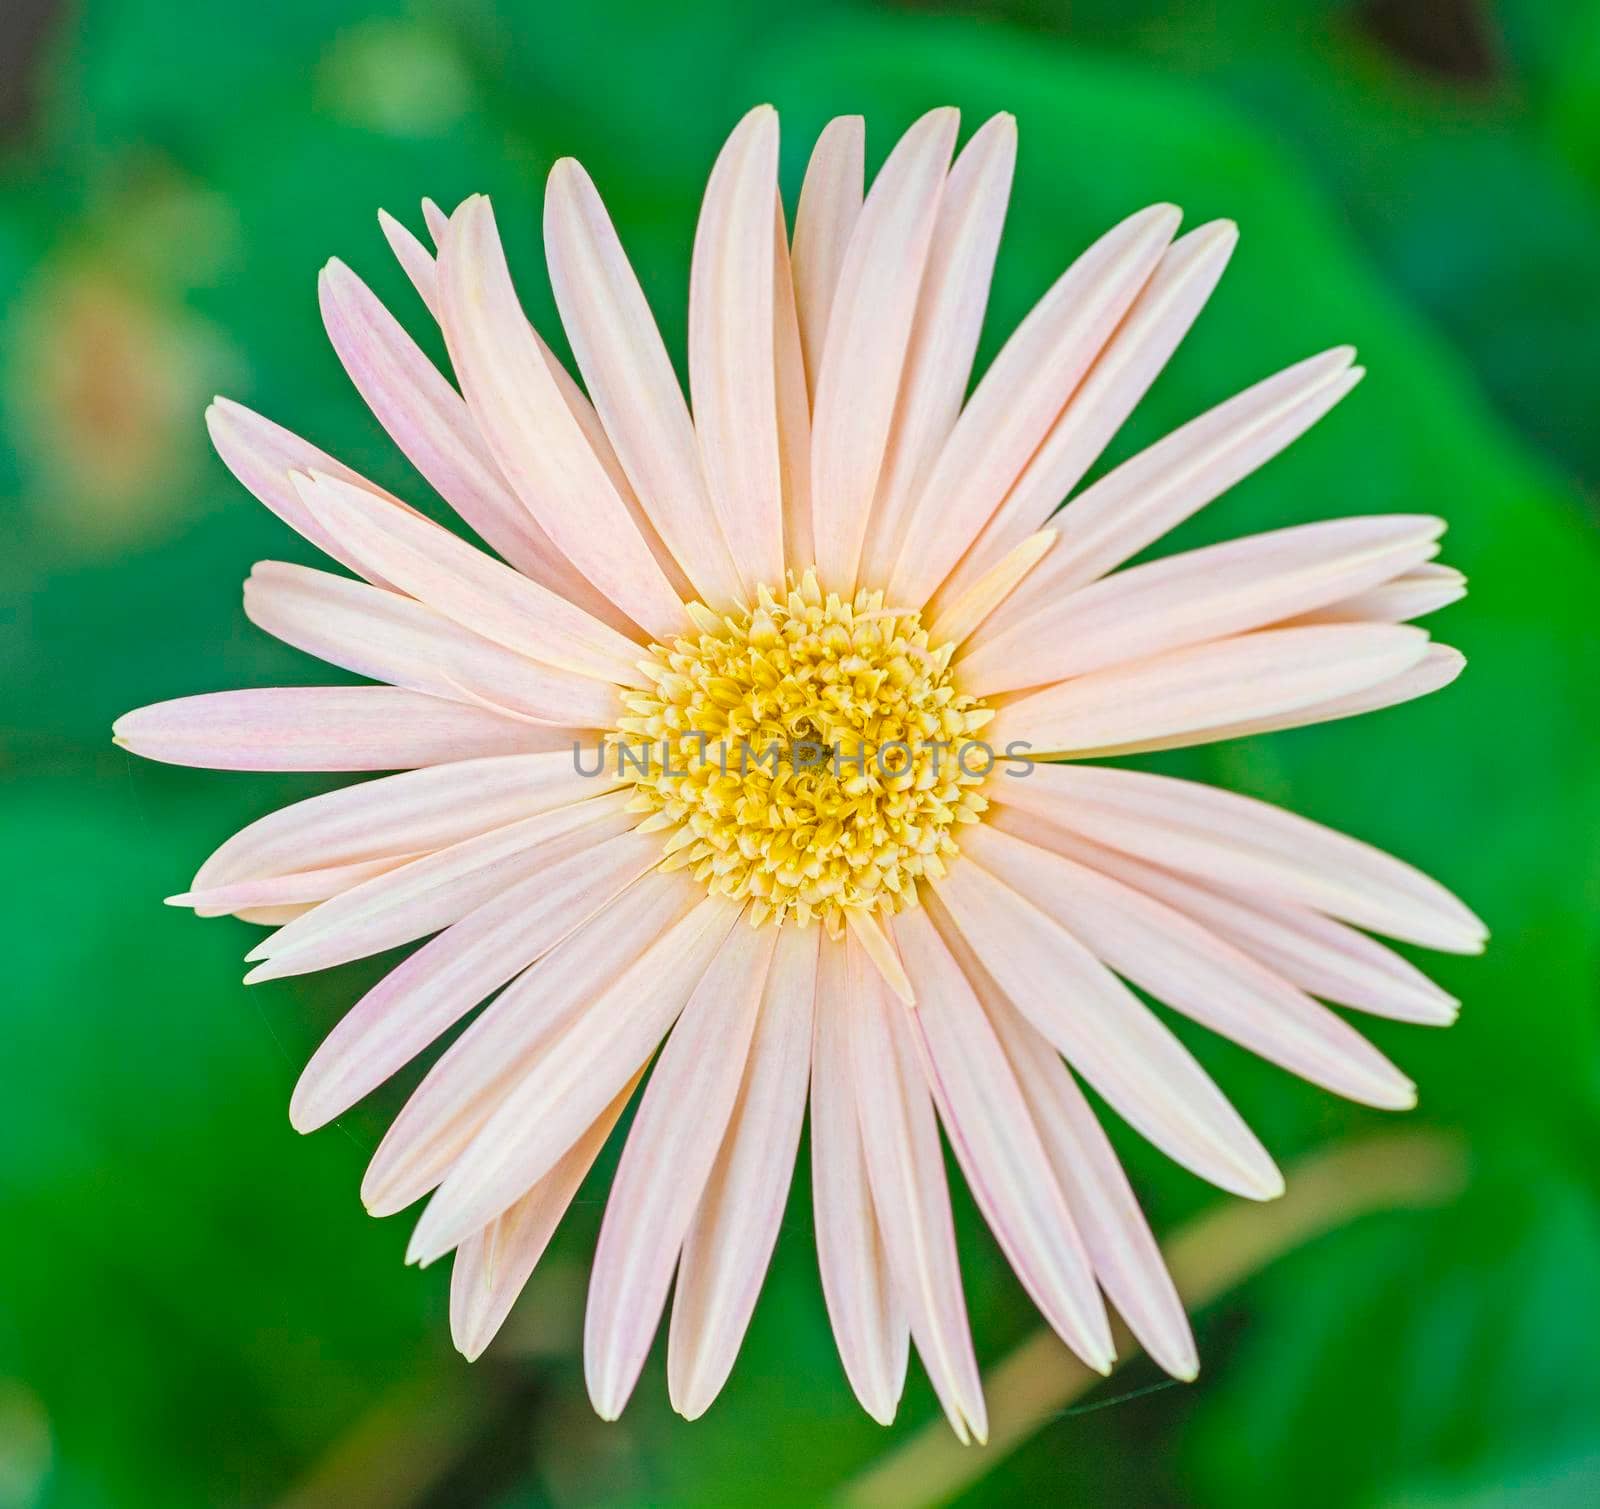 Close-up detail of a white and yellow daisy flower petals and stigma in garden